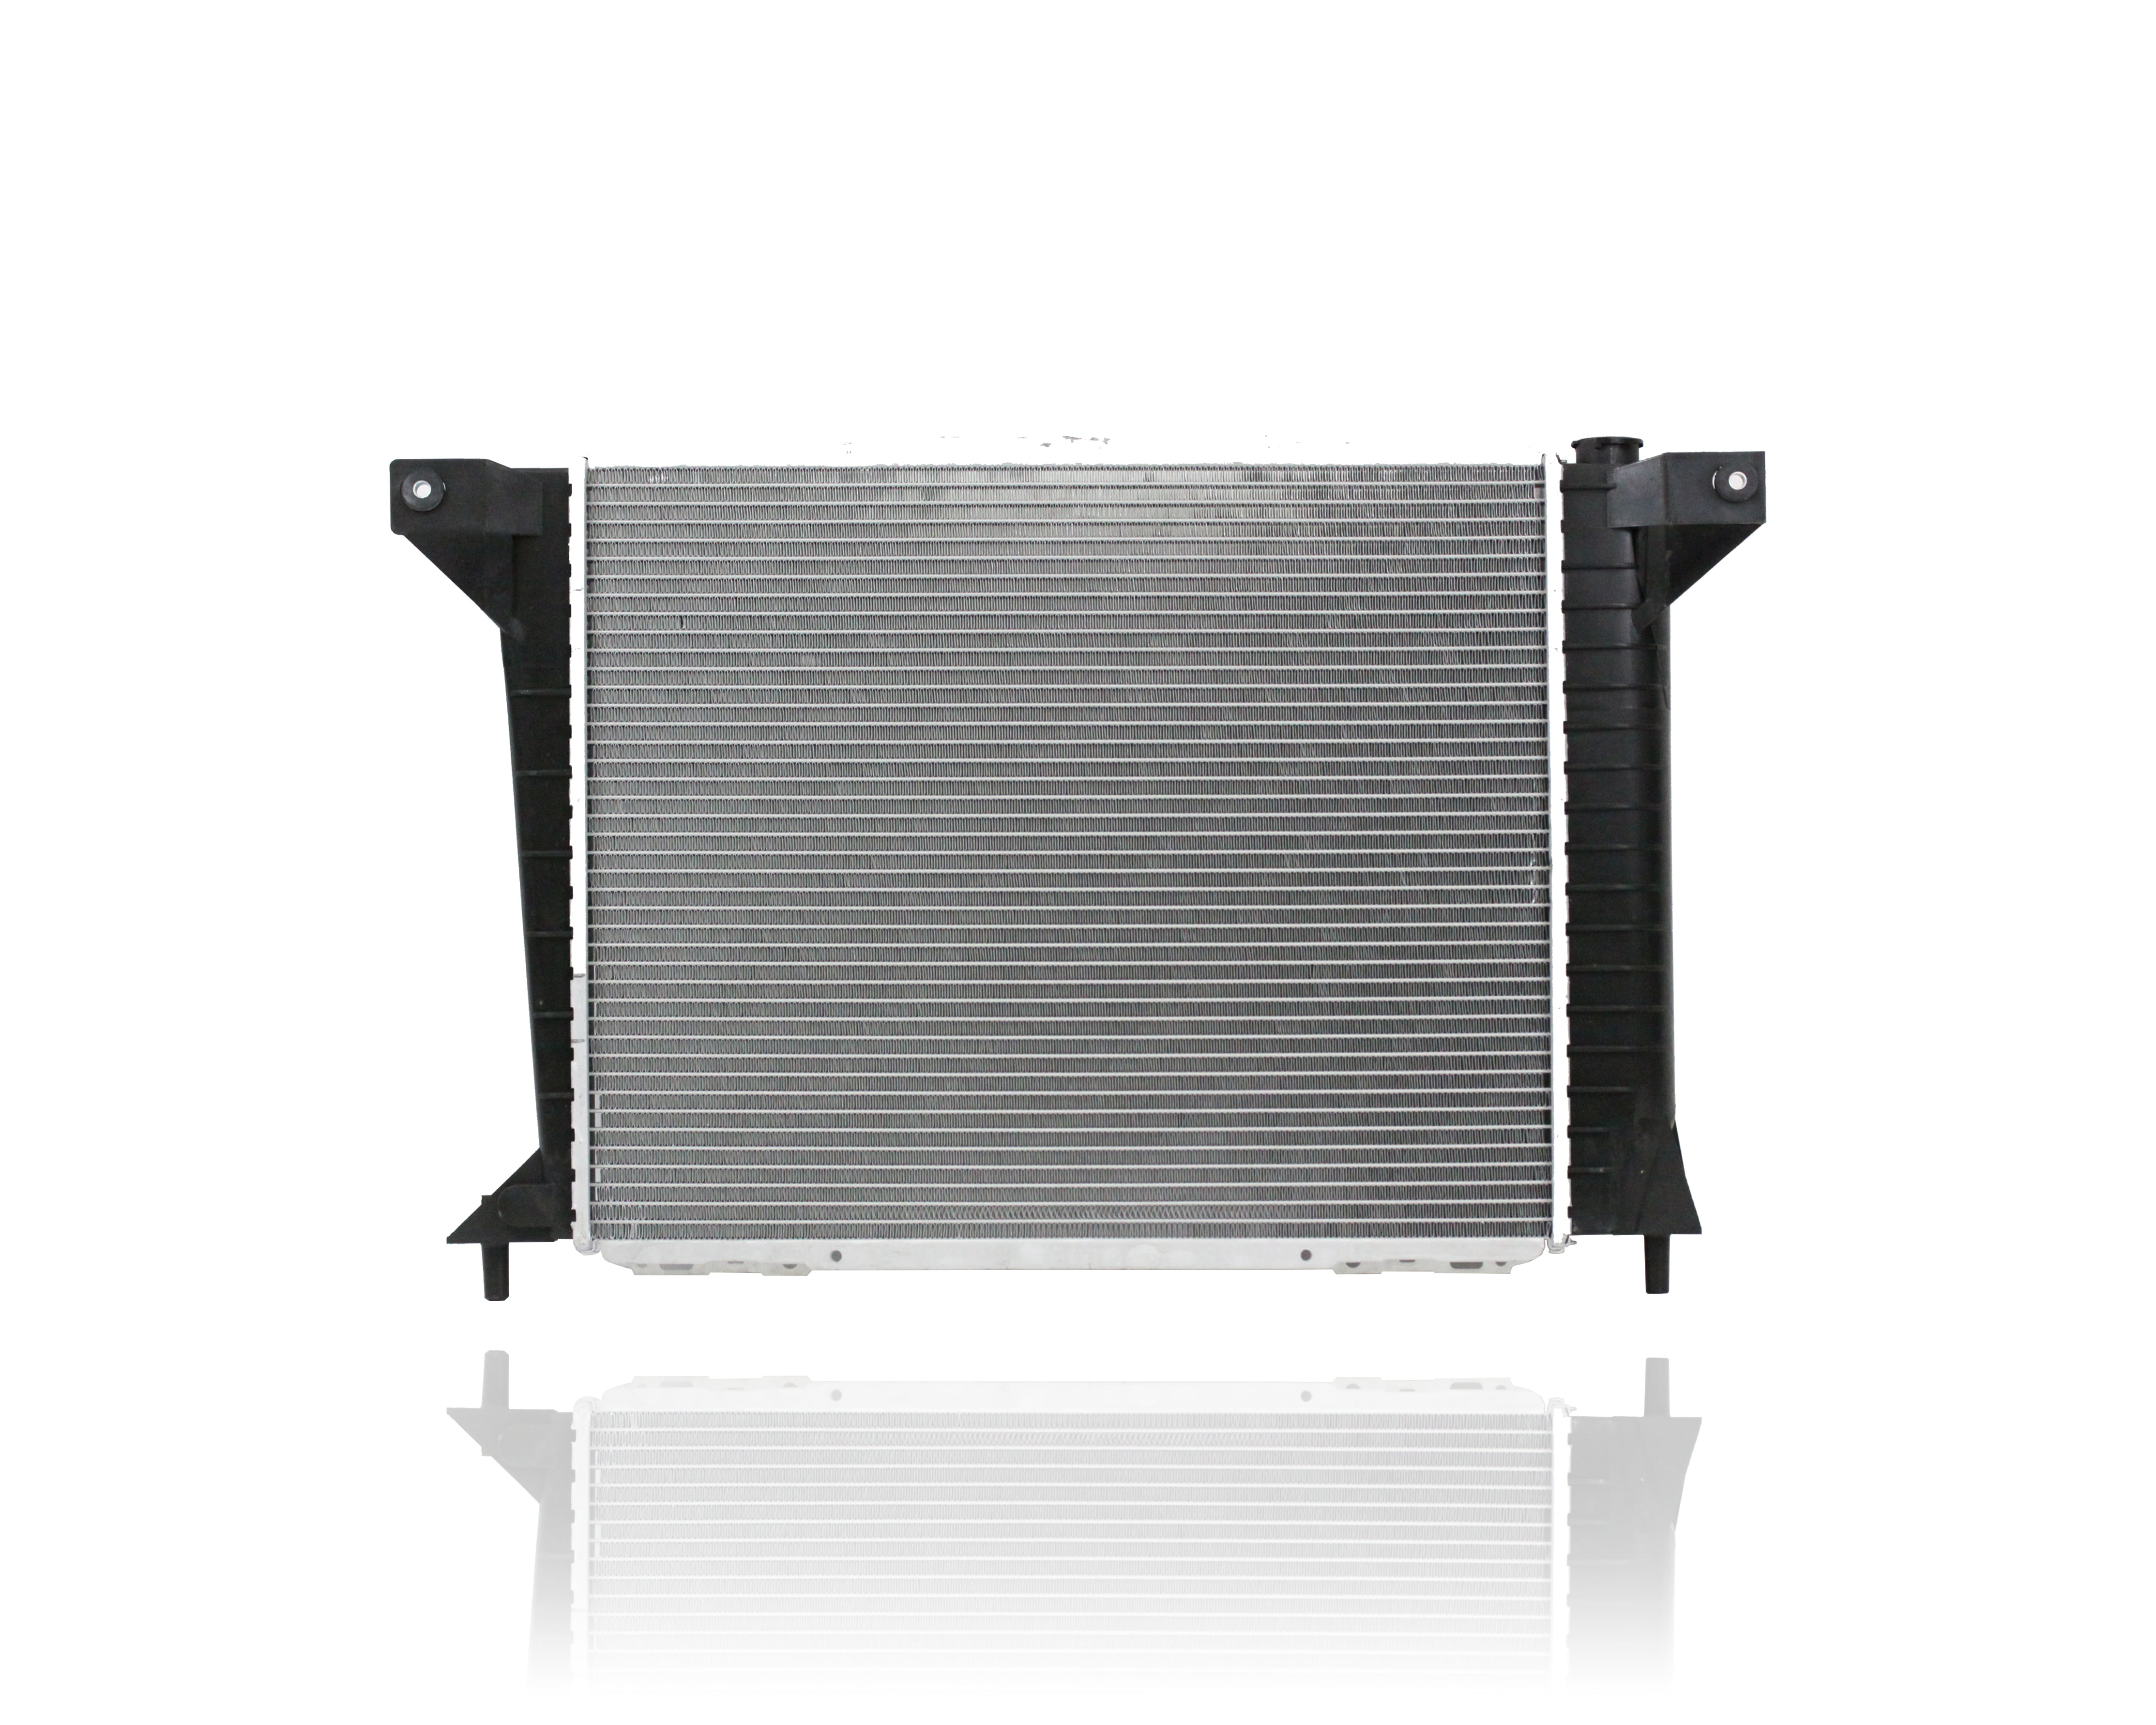 Radiator - Pacific Best Inc. Fit/For 1095 88-93 Ford Thunderbird Mercury  Cougar (Exclude Super Coupe), 87-92 Continental 3.8/5.0L - Plastic Tank